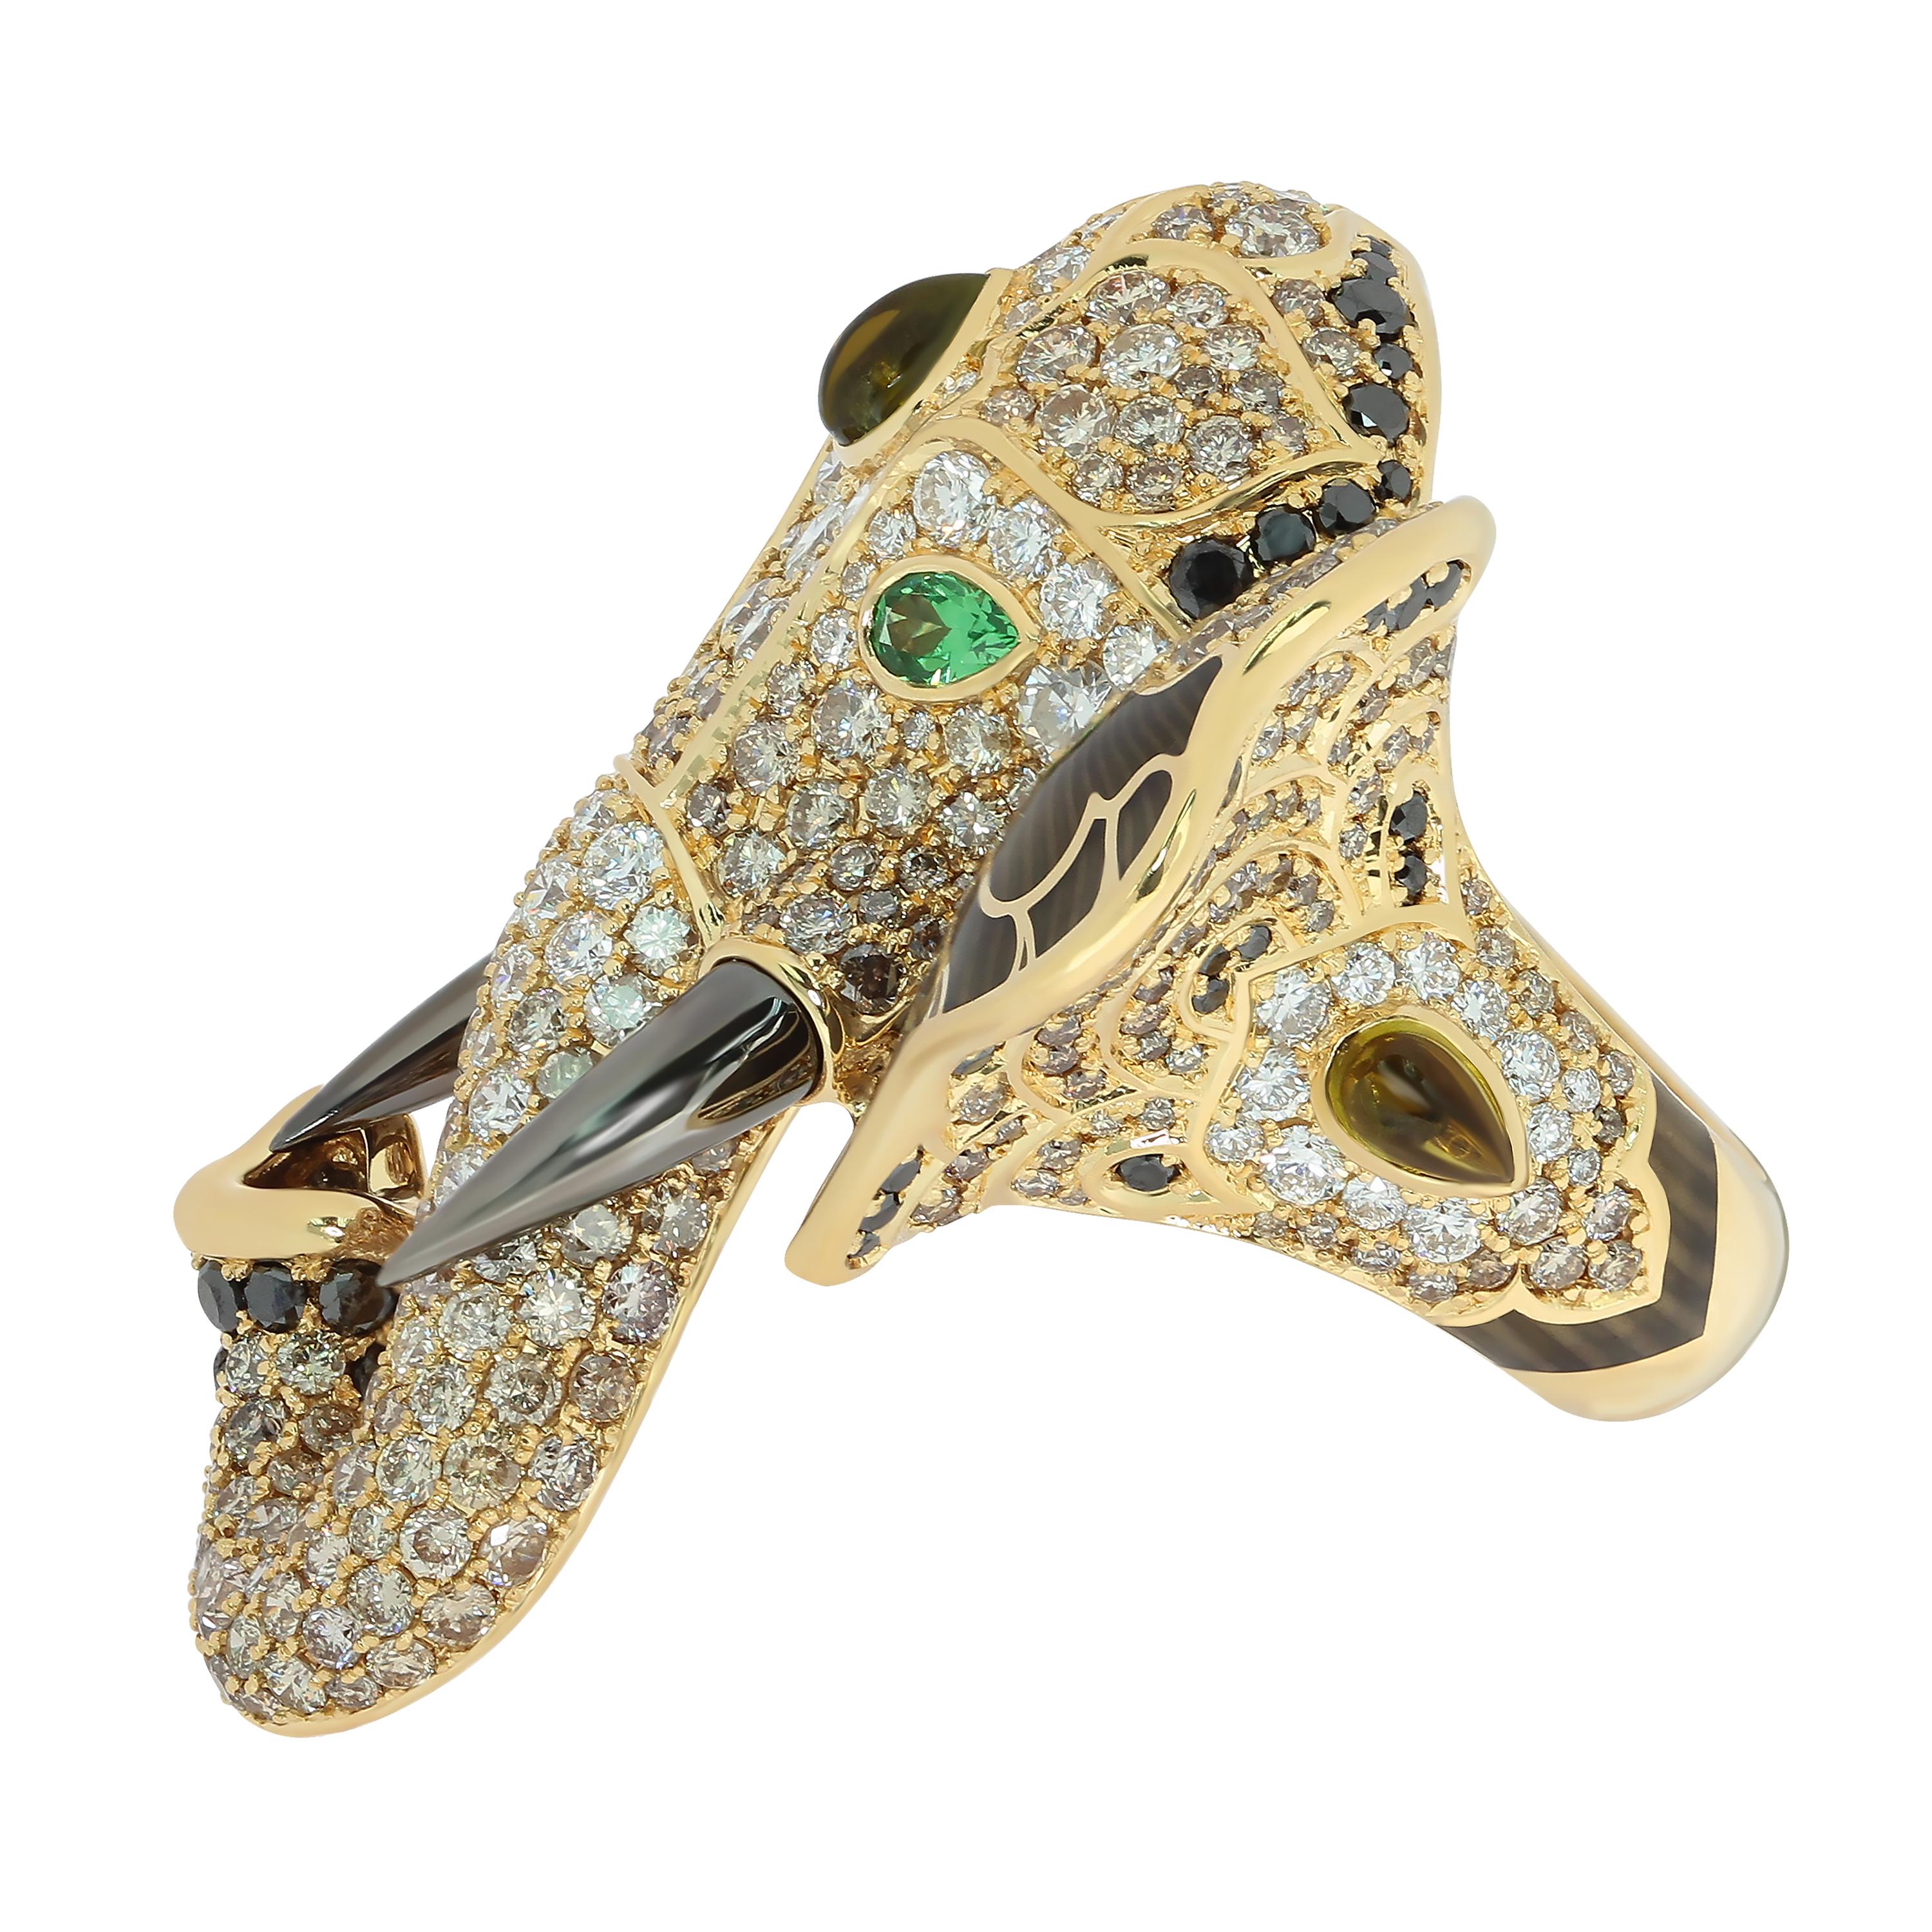 Diamonds Tsavorite Tourmaline Enamel 18 Karat Yellow Gold Elephant Ring
From ancient times in India, the elephant was a symbol of wealth, fame and power. They attend the opening of most of the ceremonies, at weddings, at religious holidays - these